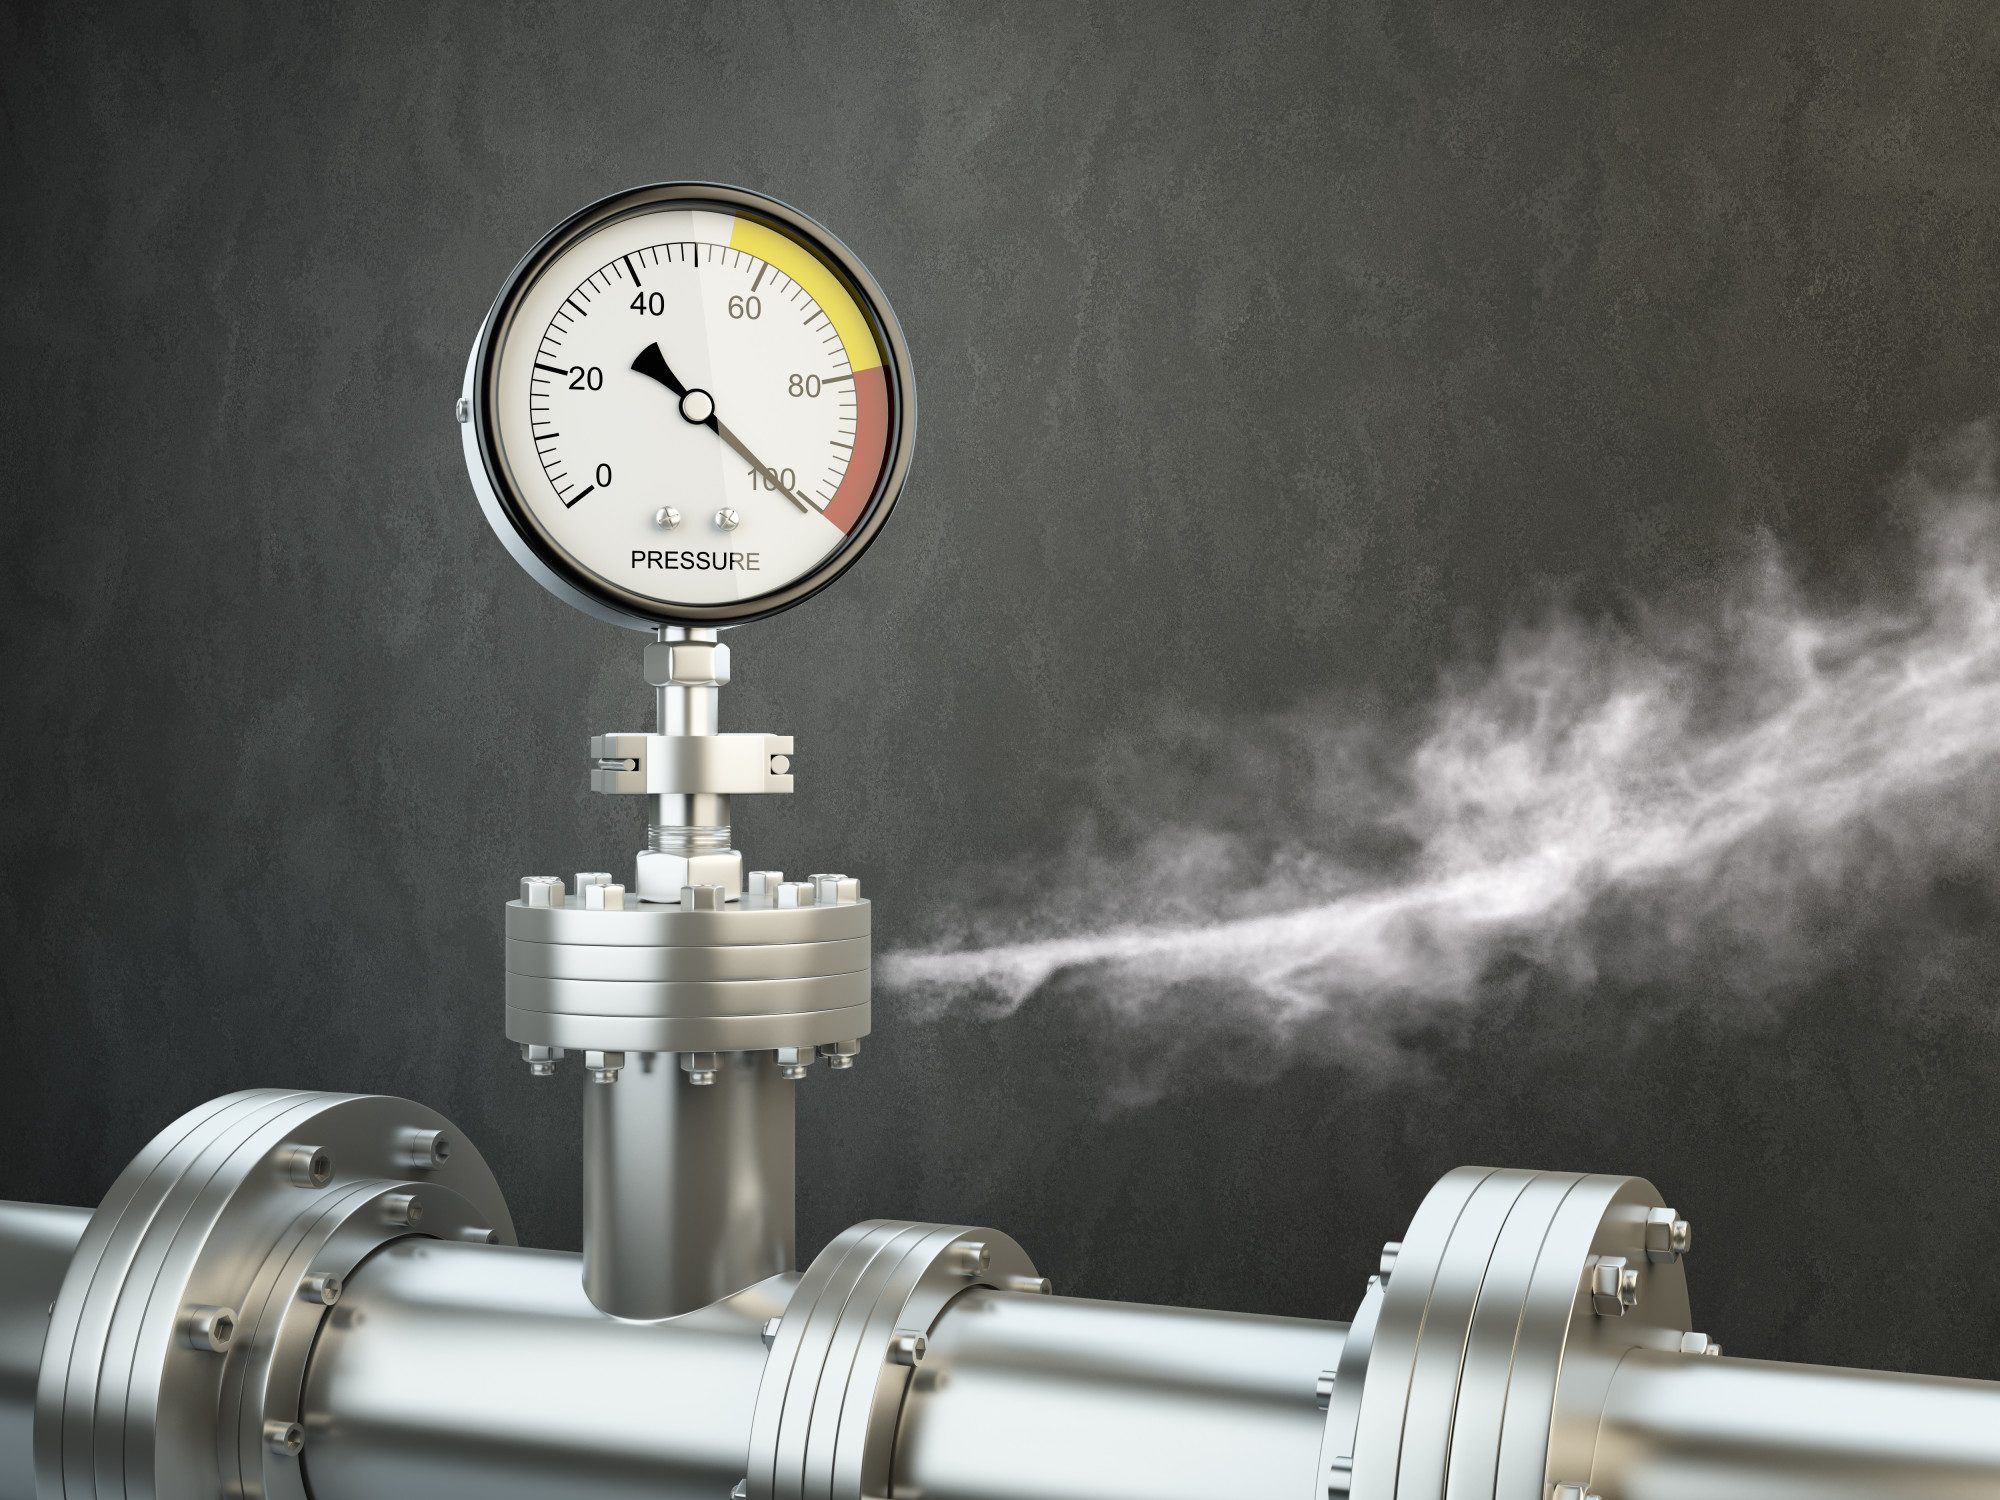 Emergency Gas Leak Repair: What You Need to Do